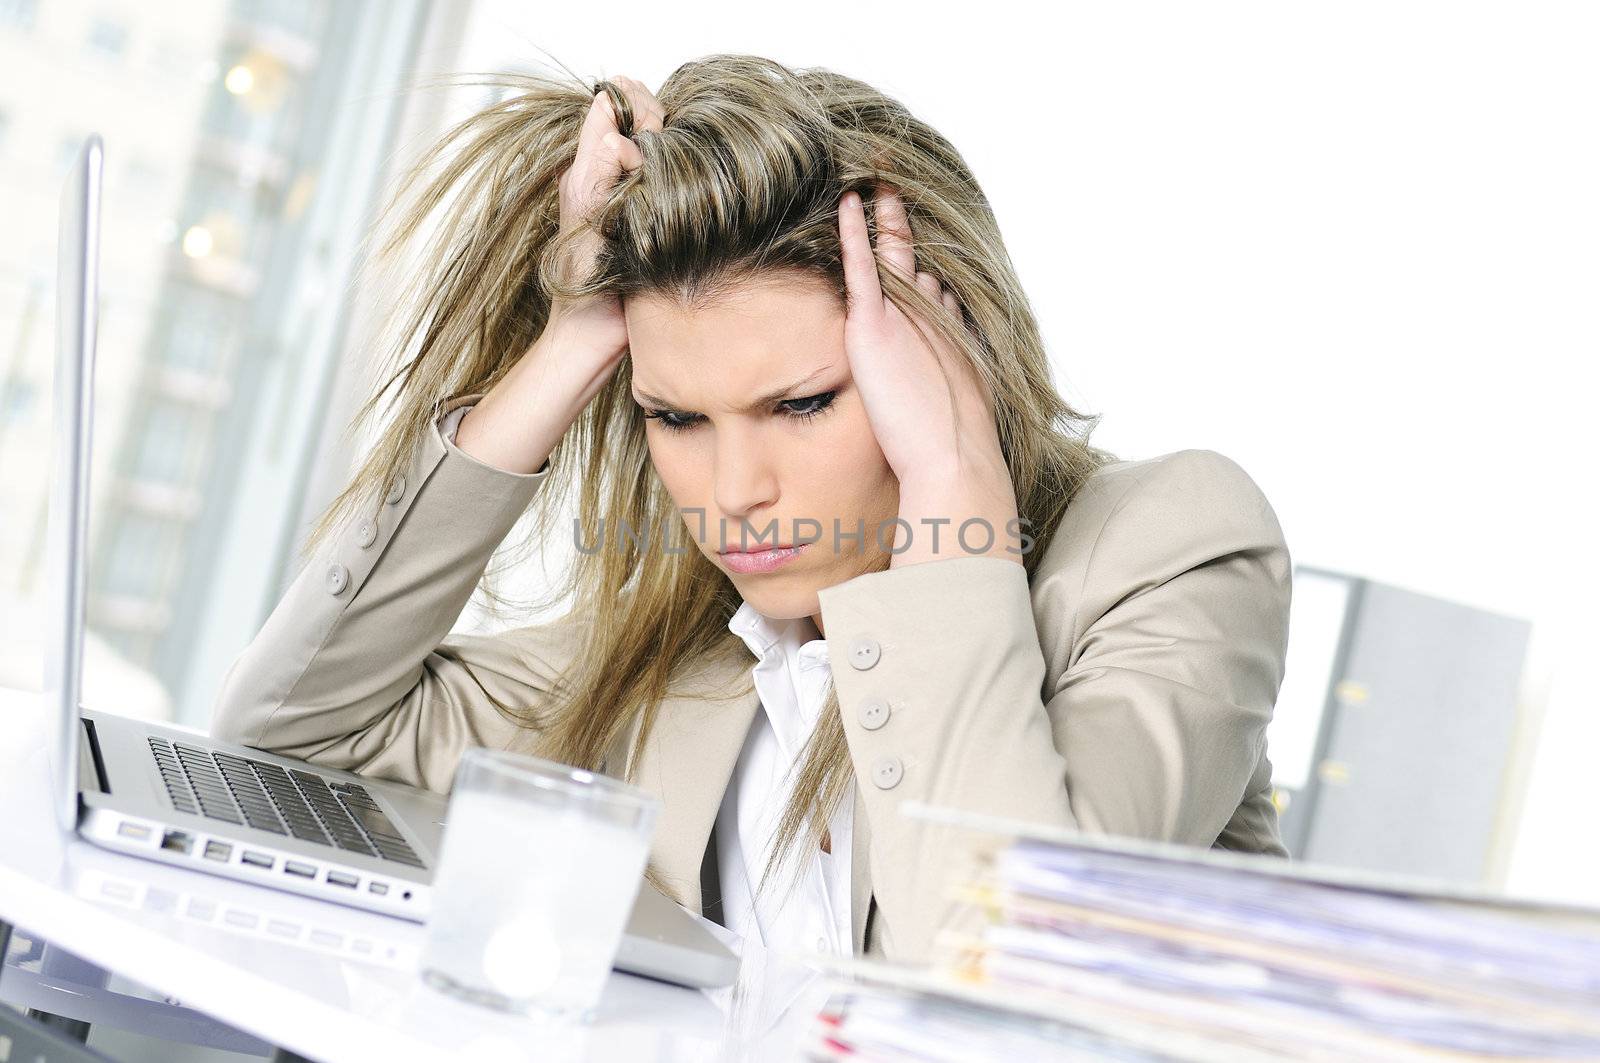 young woman stressed at work, taking an aspirin cahet